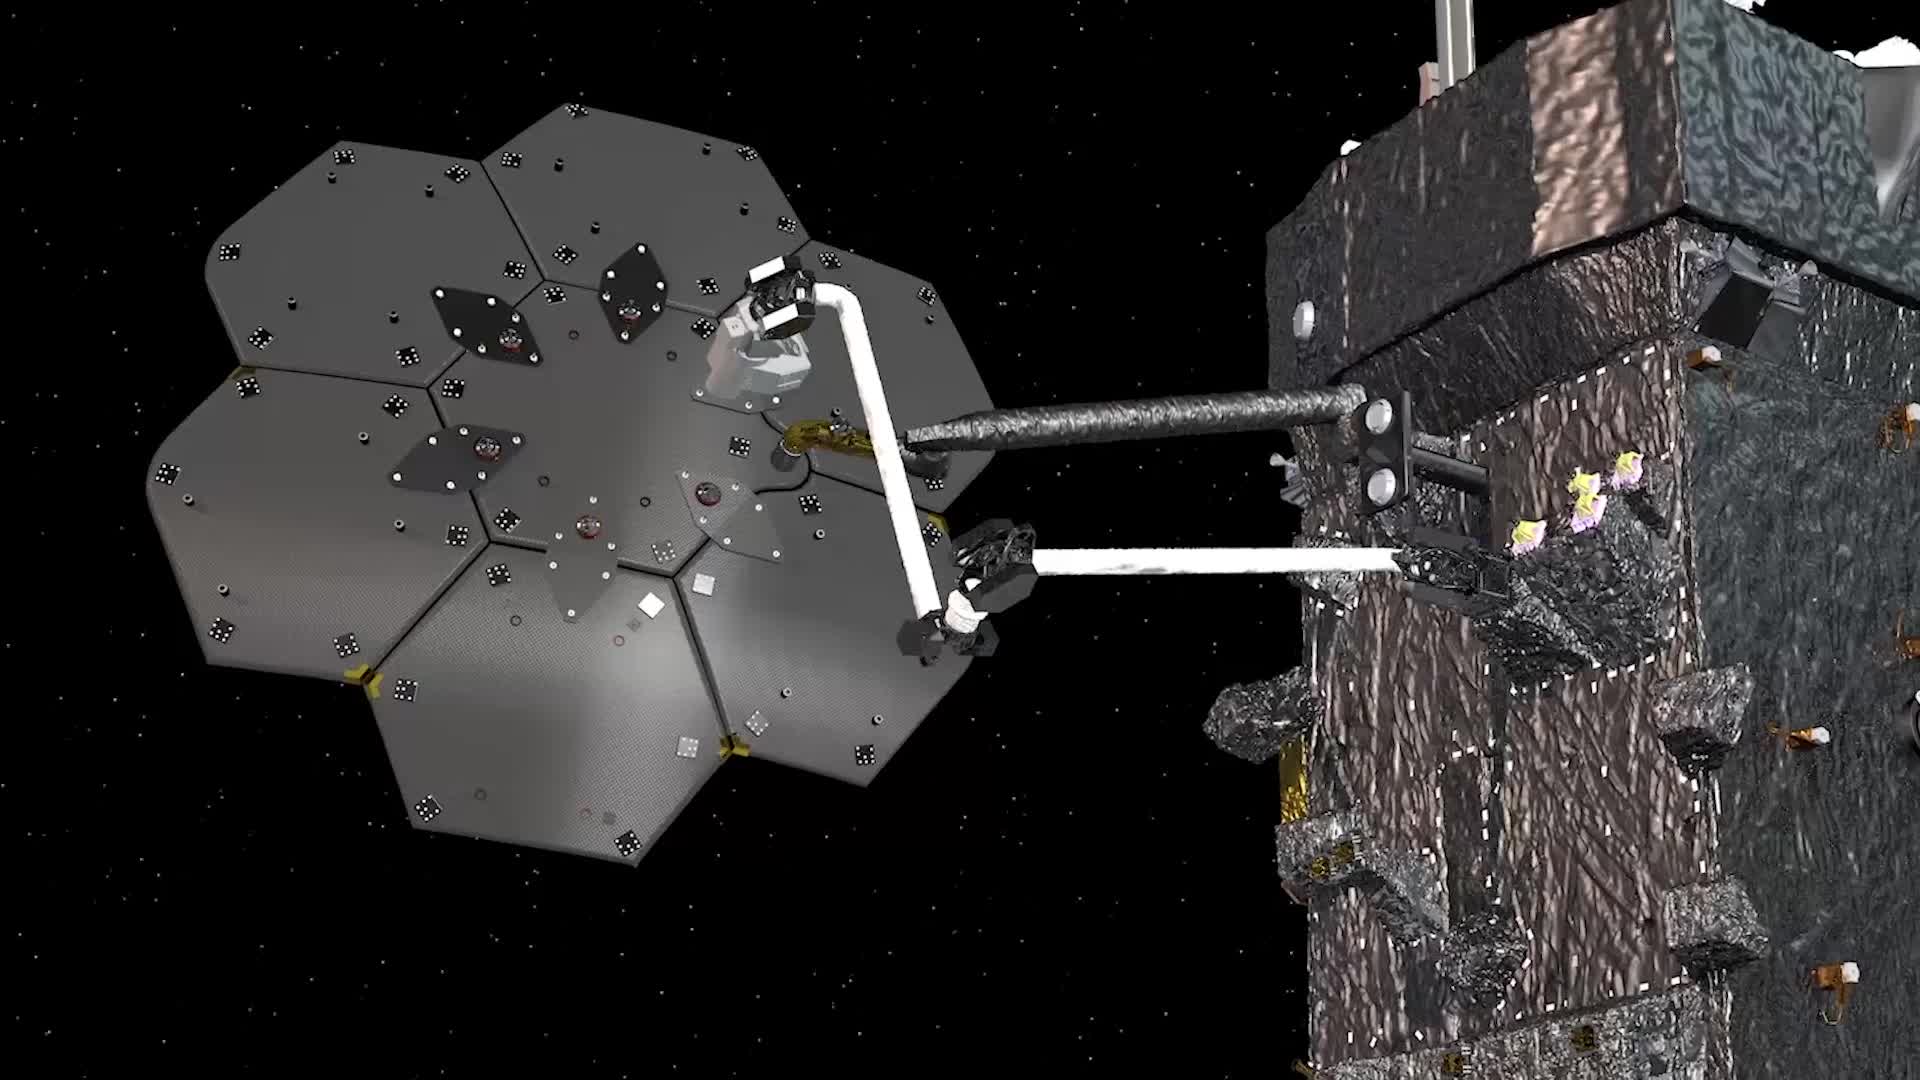 The Space Infrastructure Dexterous Robot (SPIDER) technology demonstration is slated to take place on NASA’s Restore-L spacecraft. The payload will assemble a functional communications antenna and manufacture a spacecraft beam.